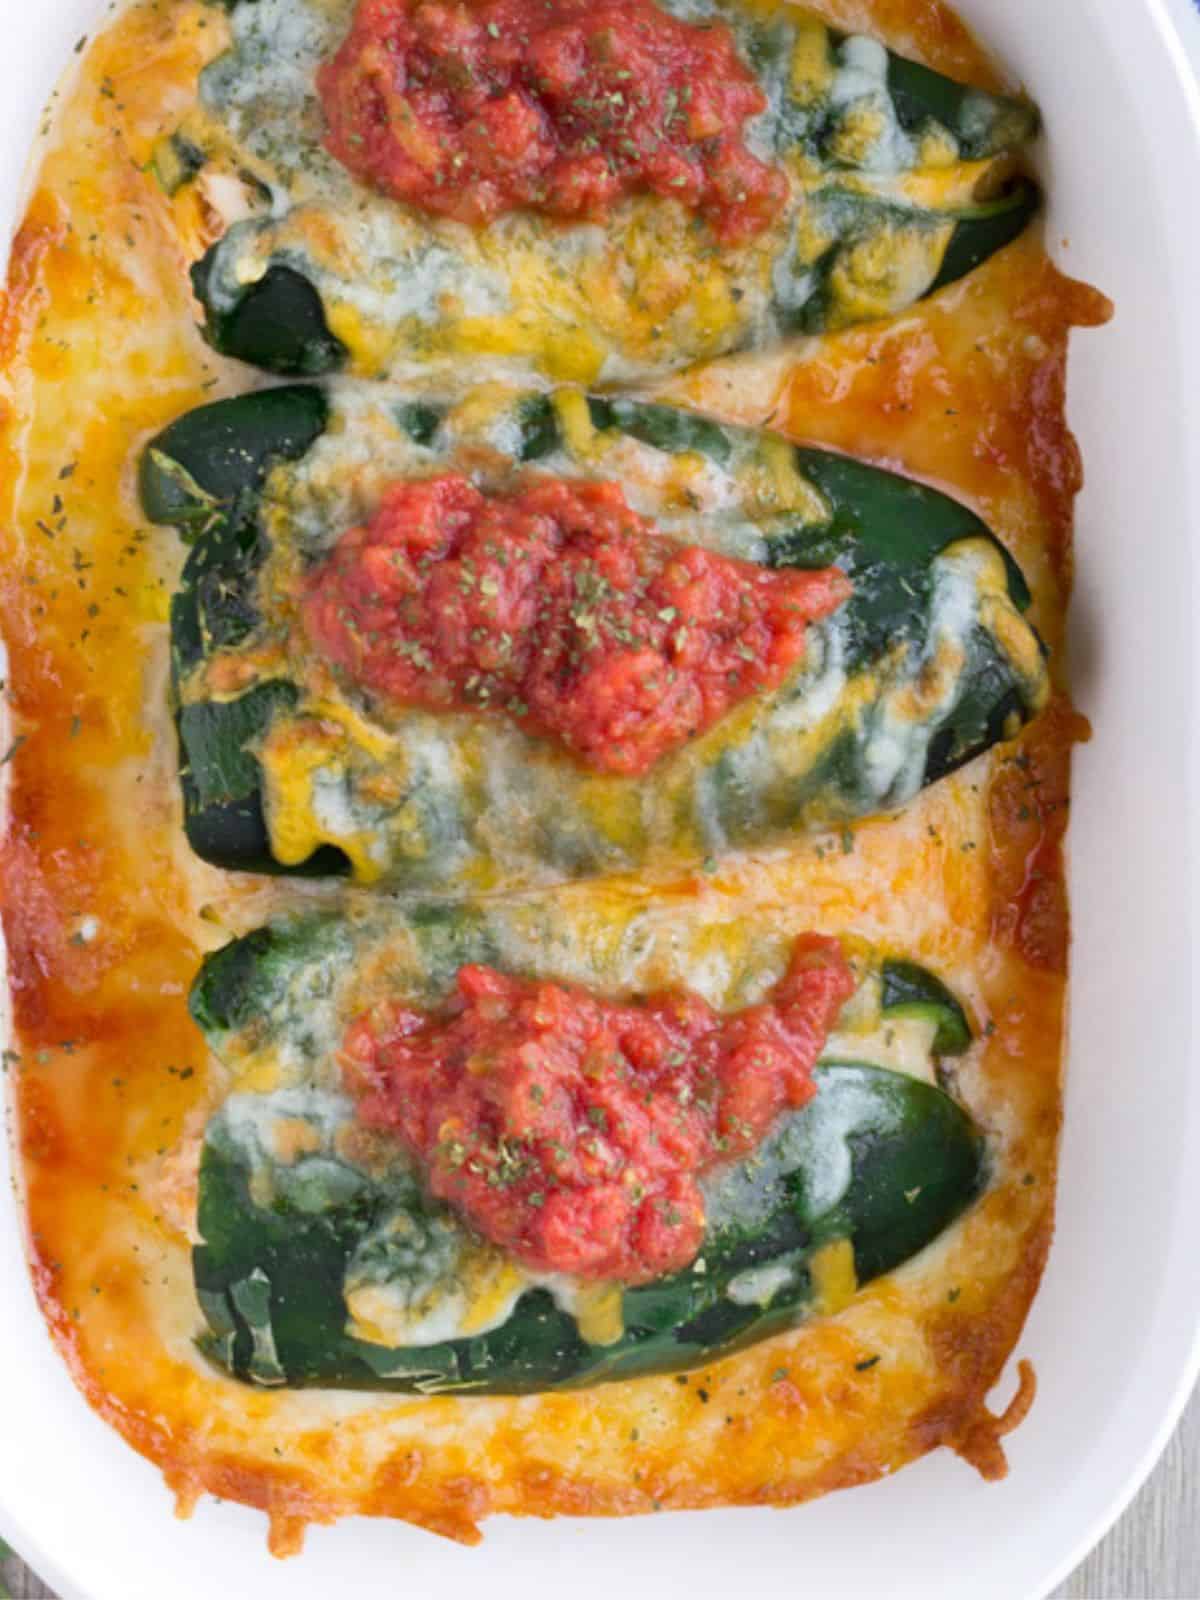 Baked chicken chili rellenos in a white casserole dish.